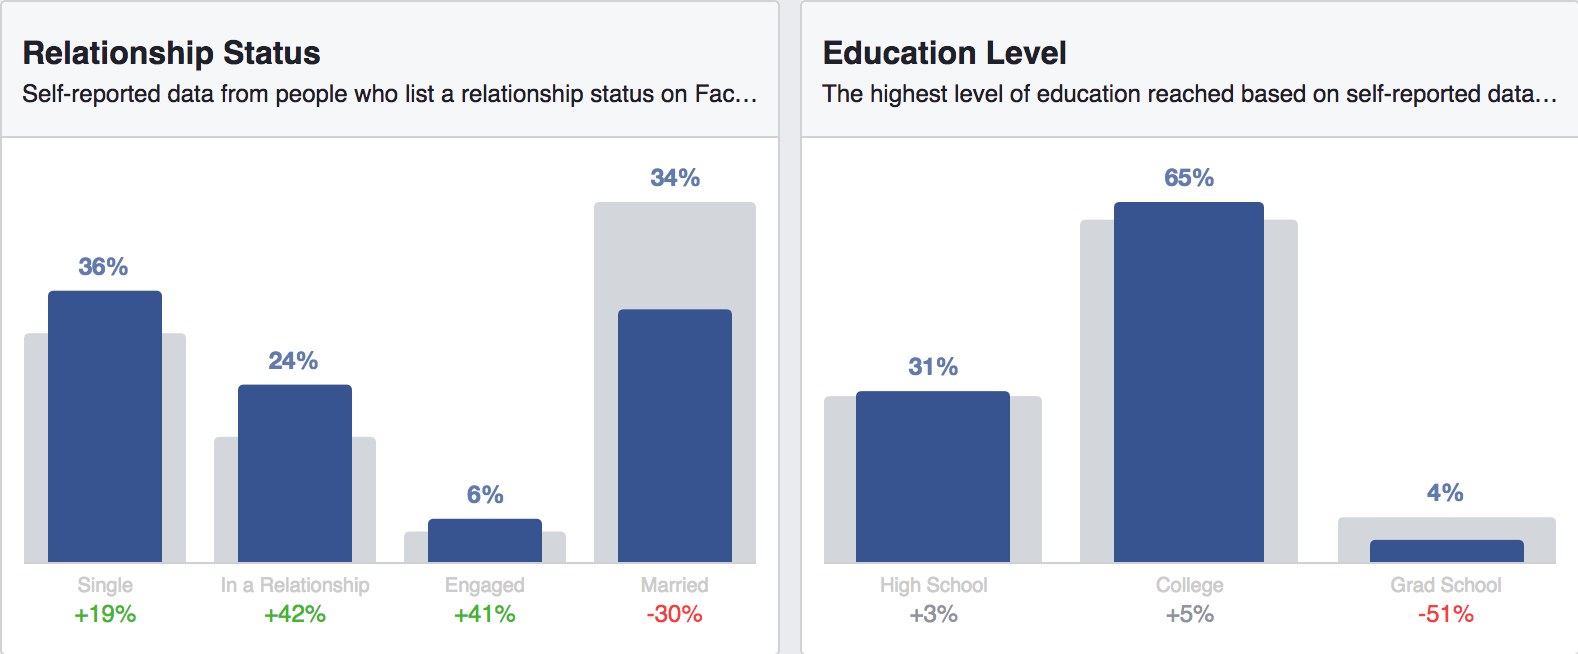 audience-relationship-status-and-education